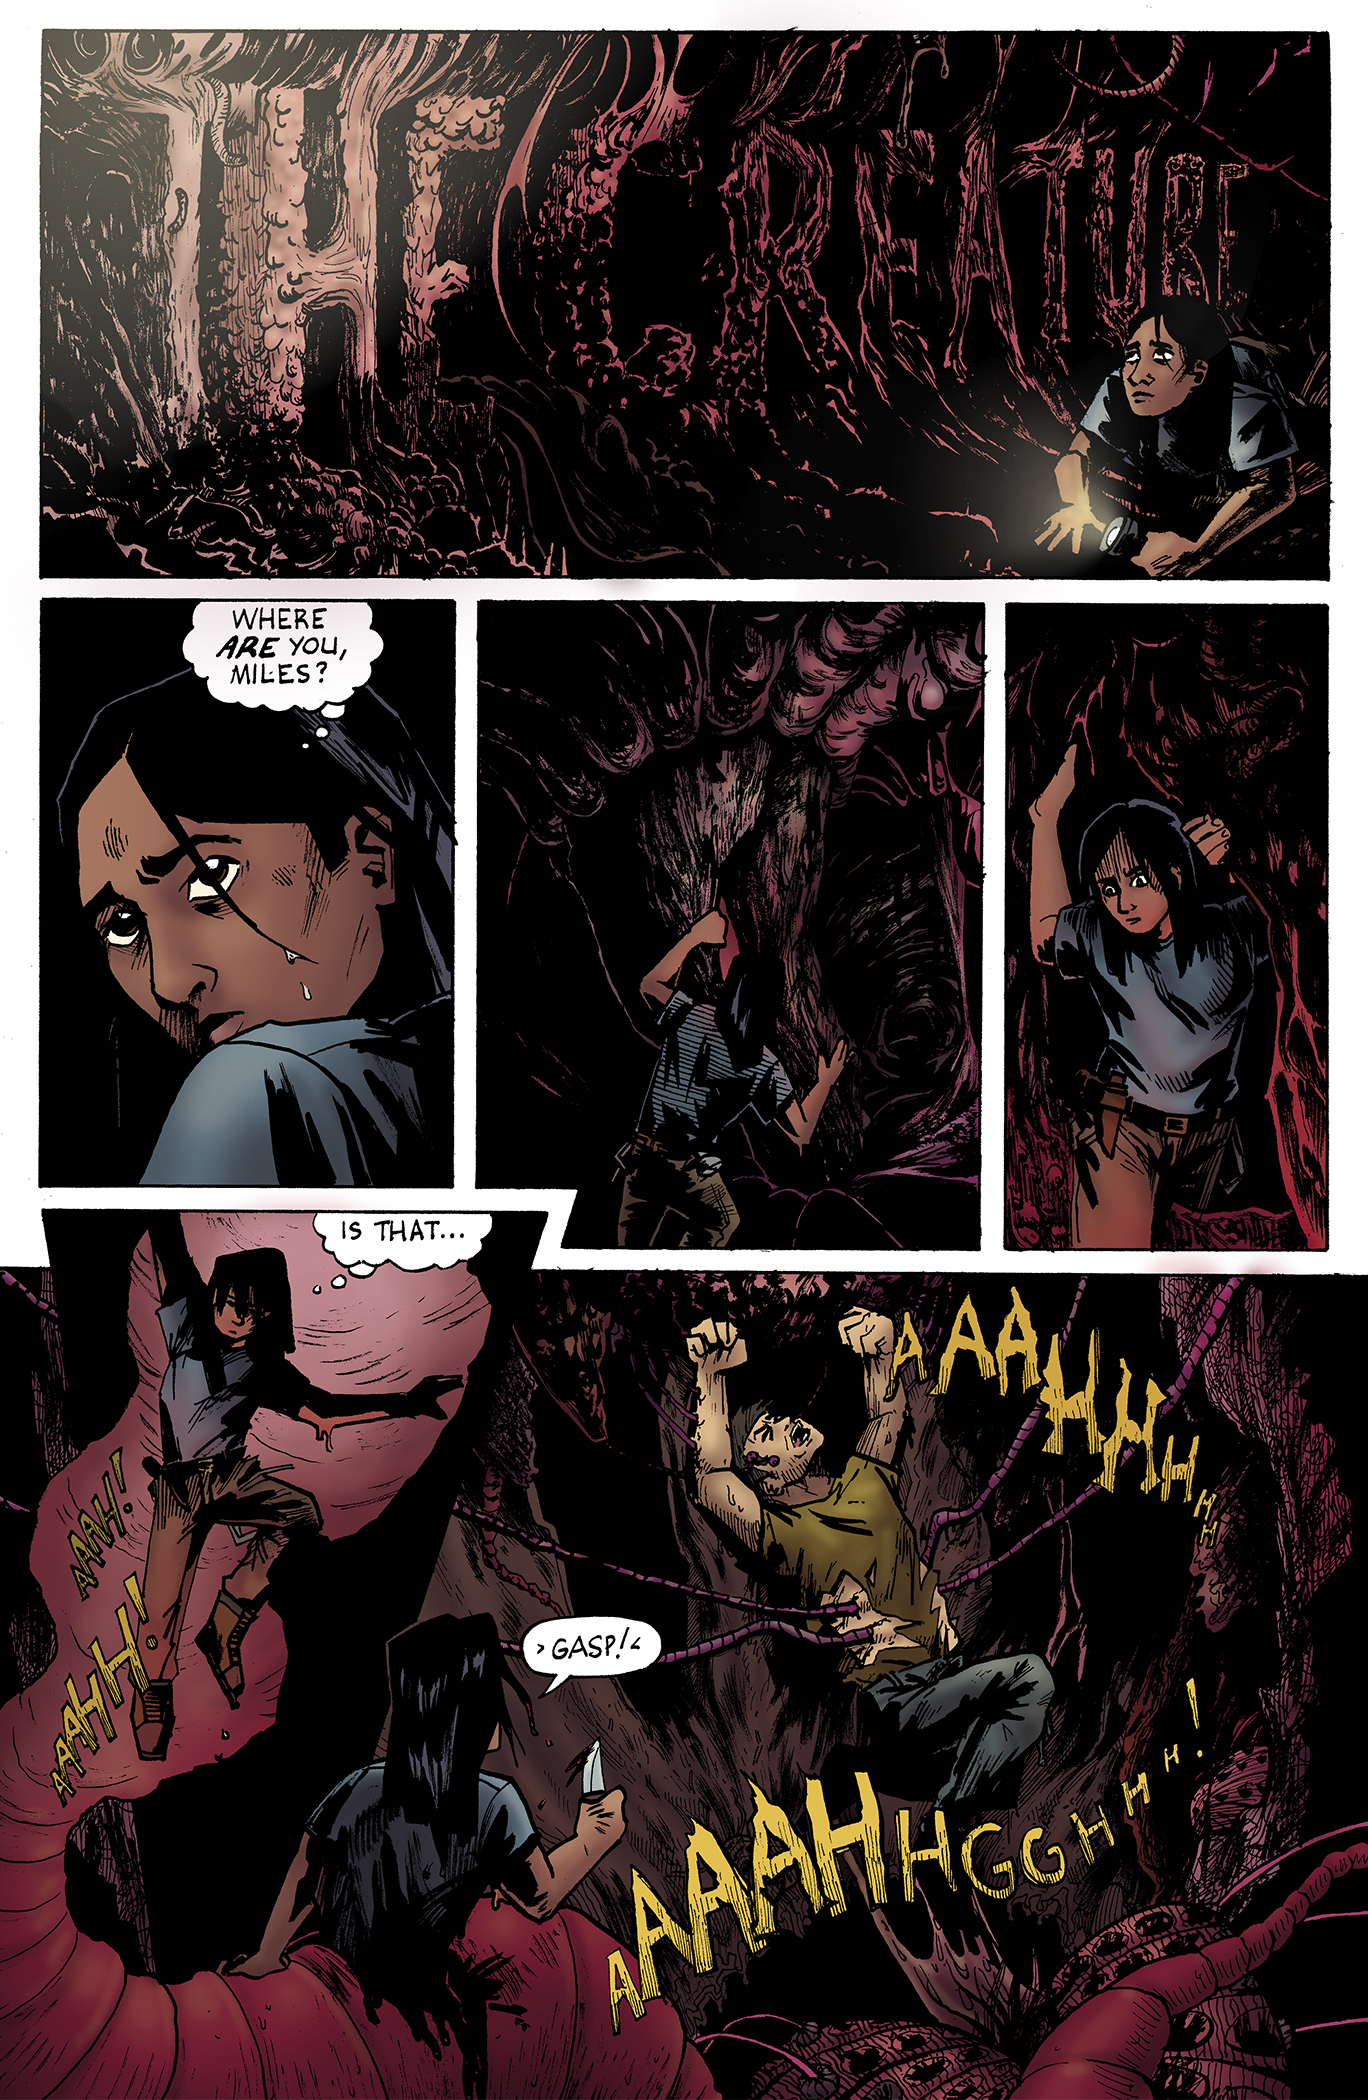 A seven-panel color comics sequence titled: The Creature, in which a young explorer travels through the bowels of a red, fleshy creature to search for their friend, Miles. In the final panel, they find Miles strung up in the belly of the creature, screaming in pain, with tendrils of the creature running though his body.